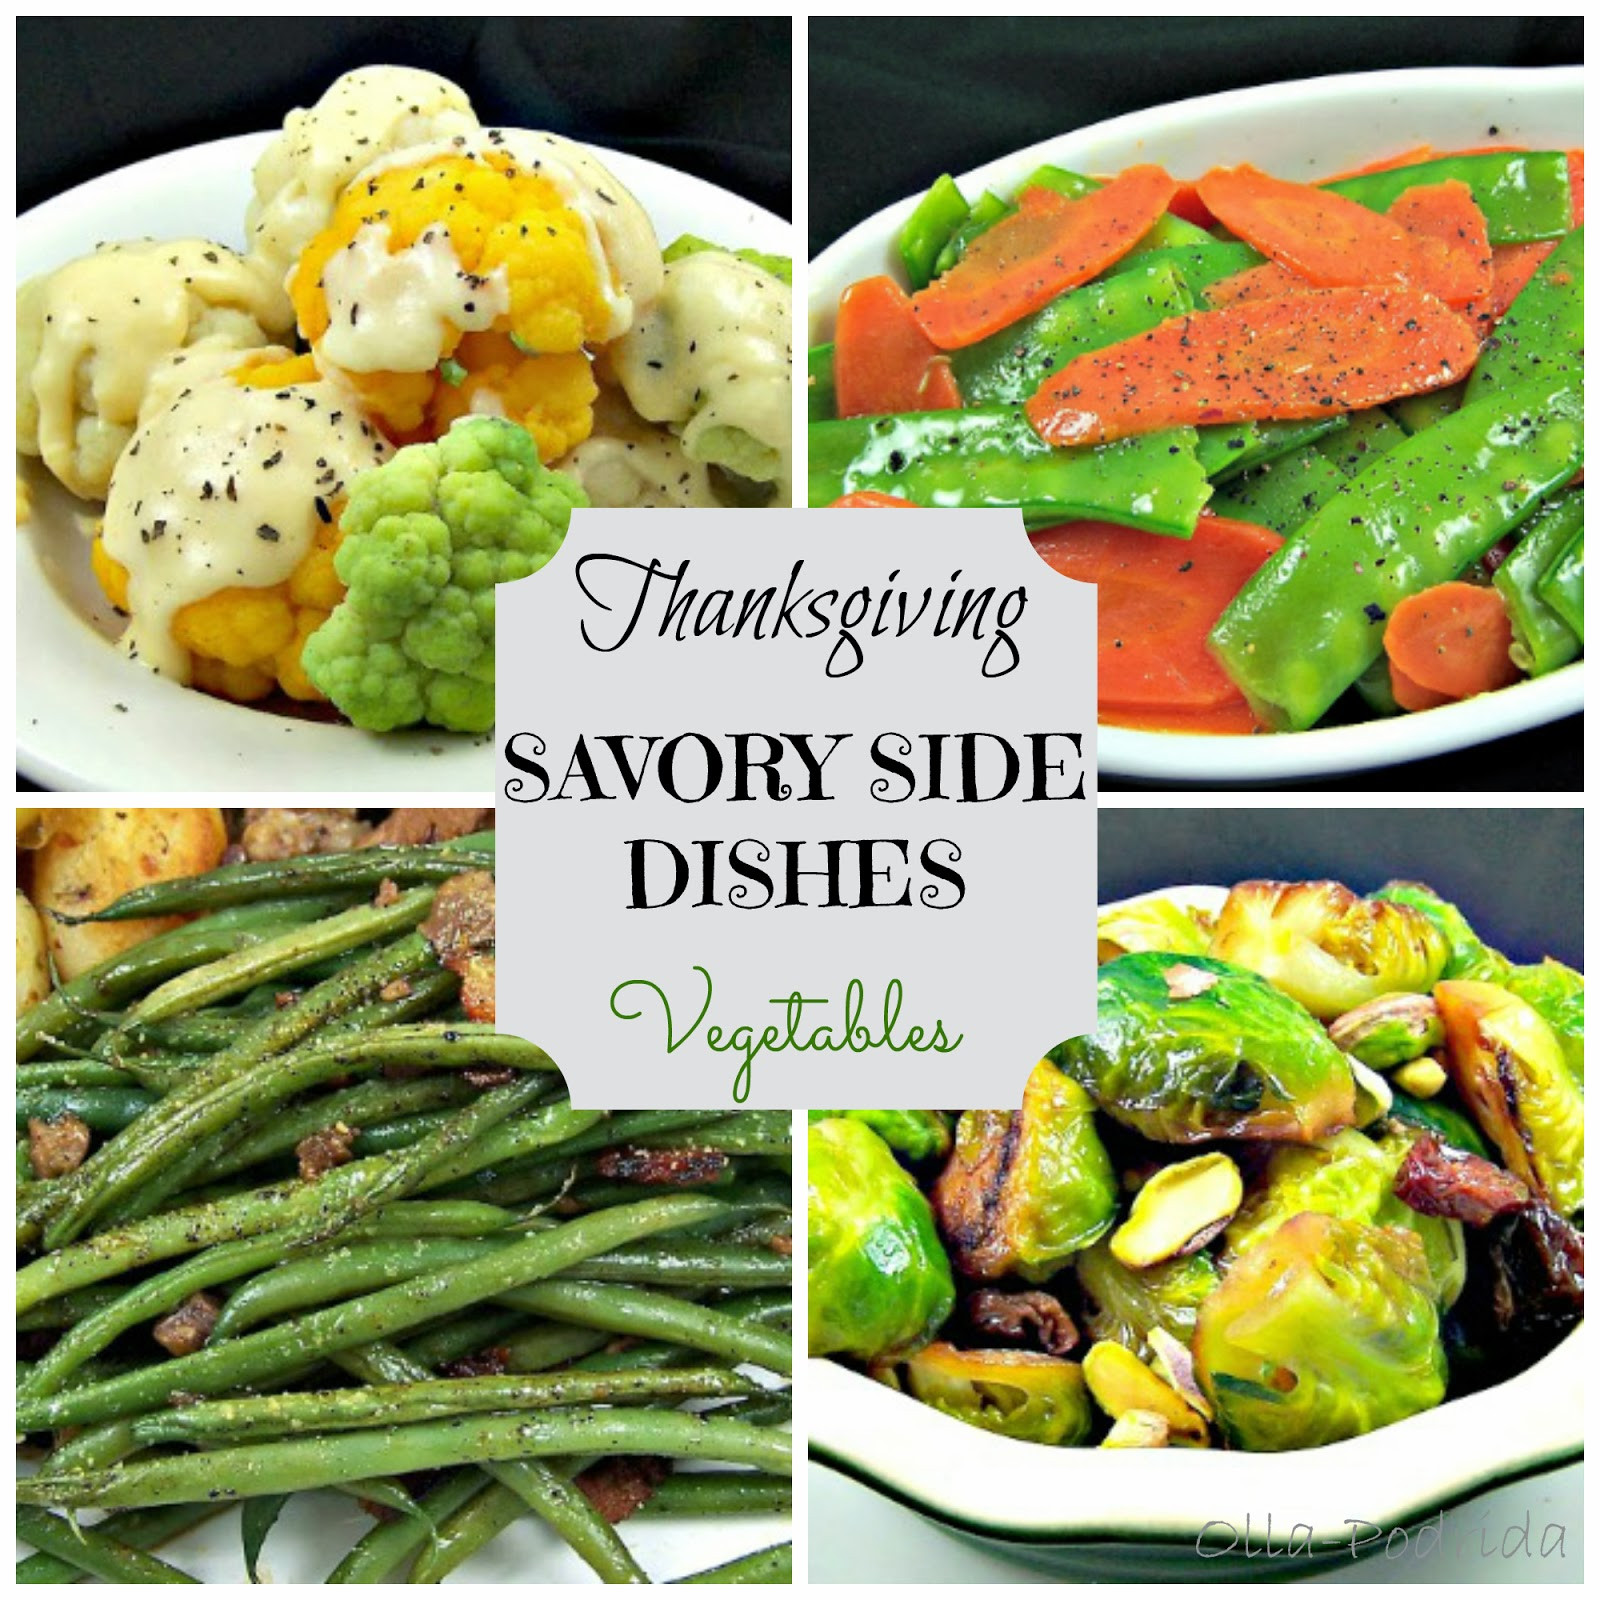 Thanksgiving Vegetable Side Dishes
 Olla Podrida Thanksgiving Savory Side Dishes Ve ables